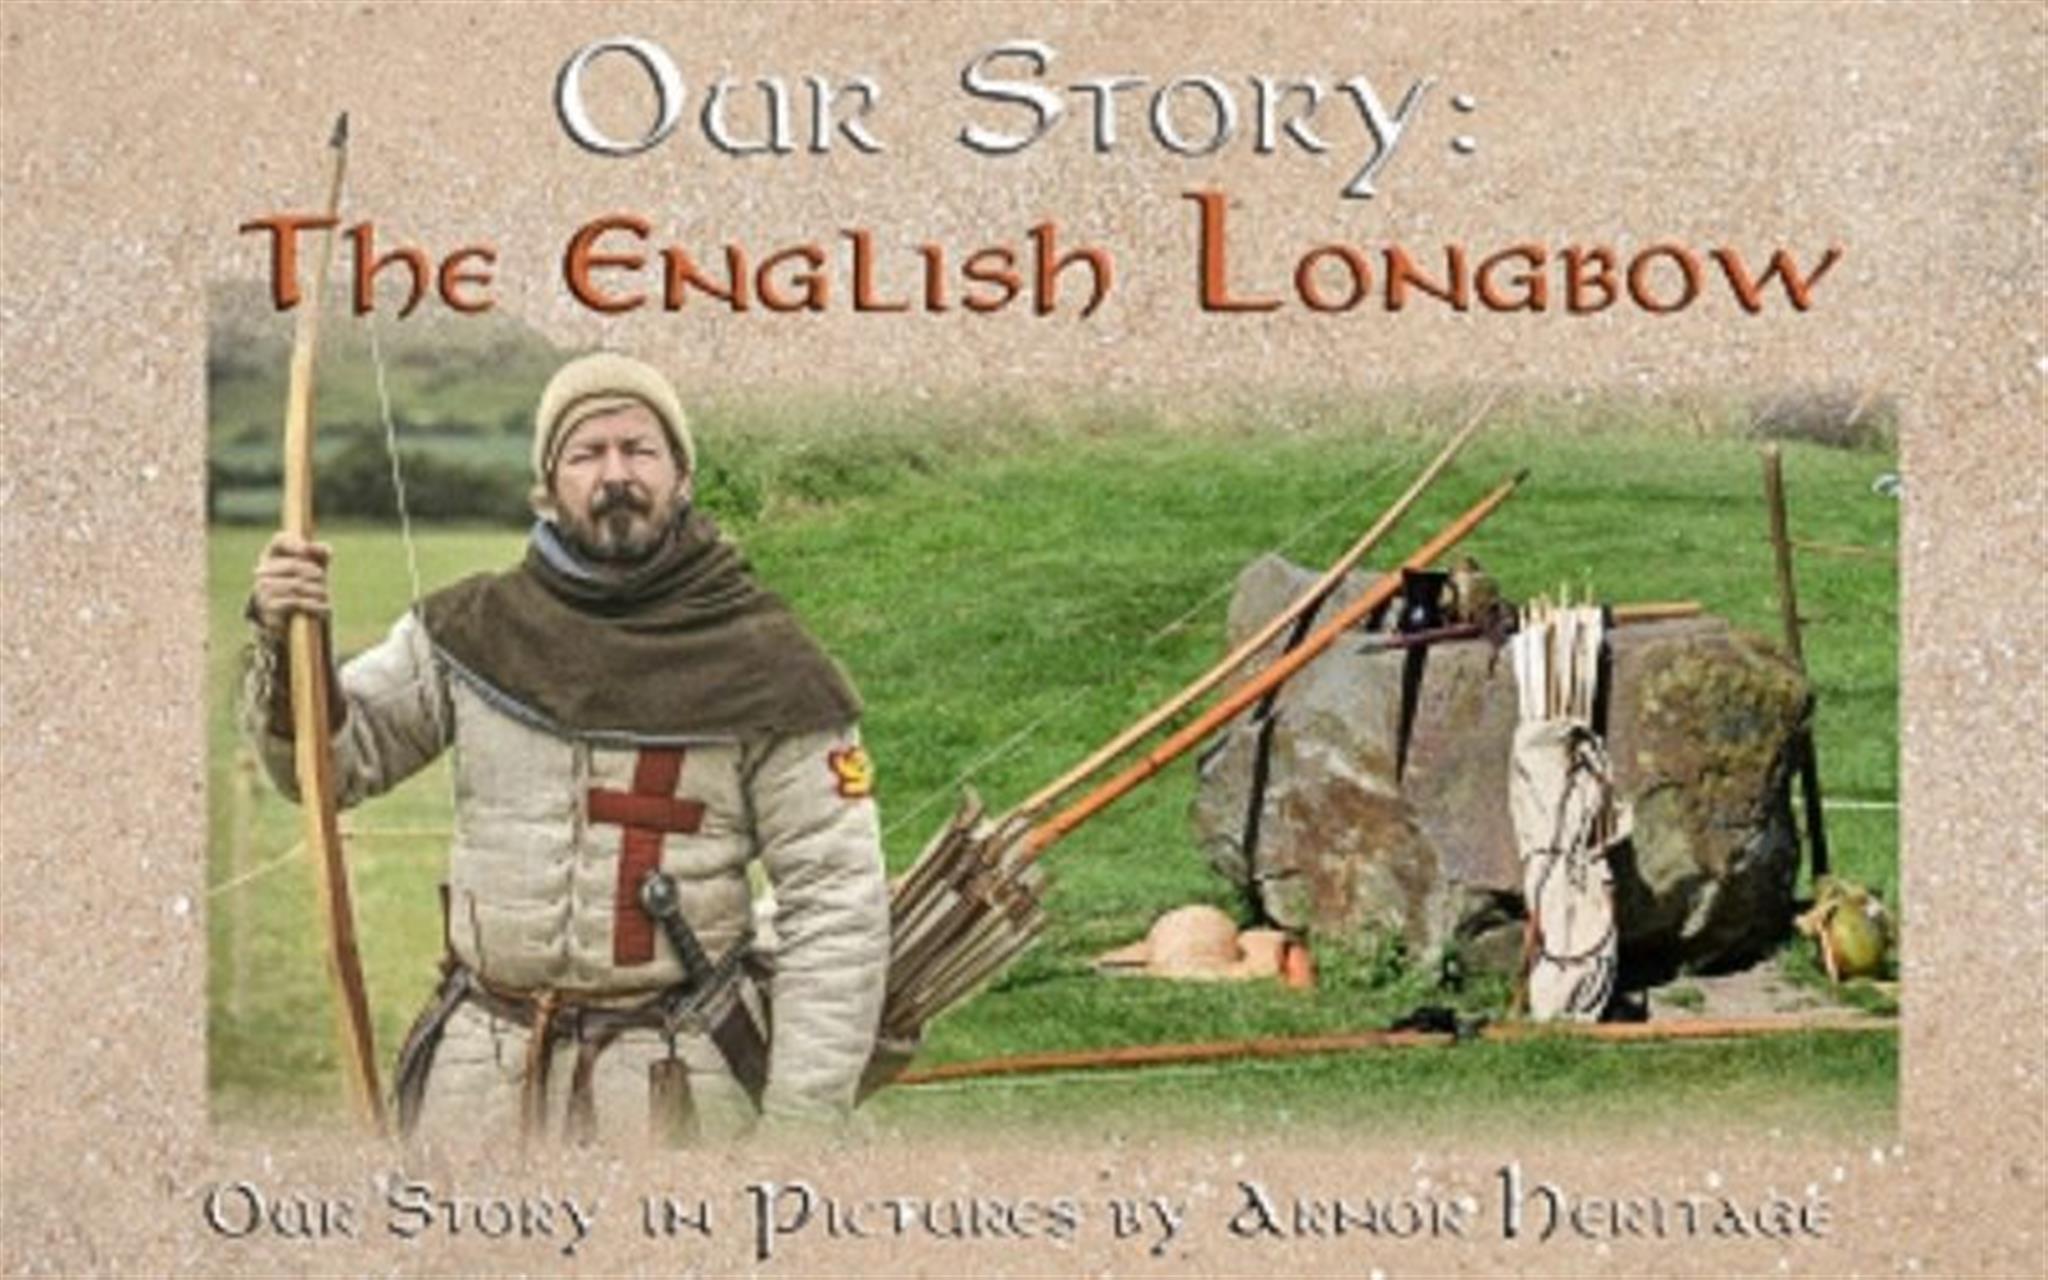 History of the English Longbow